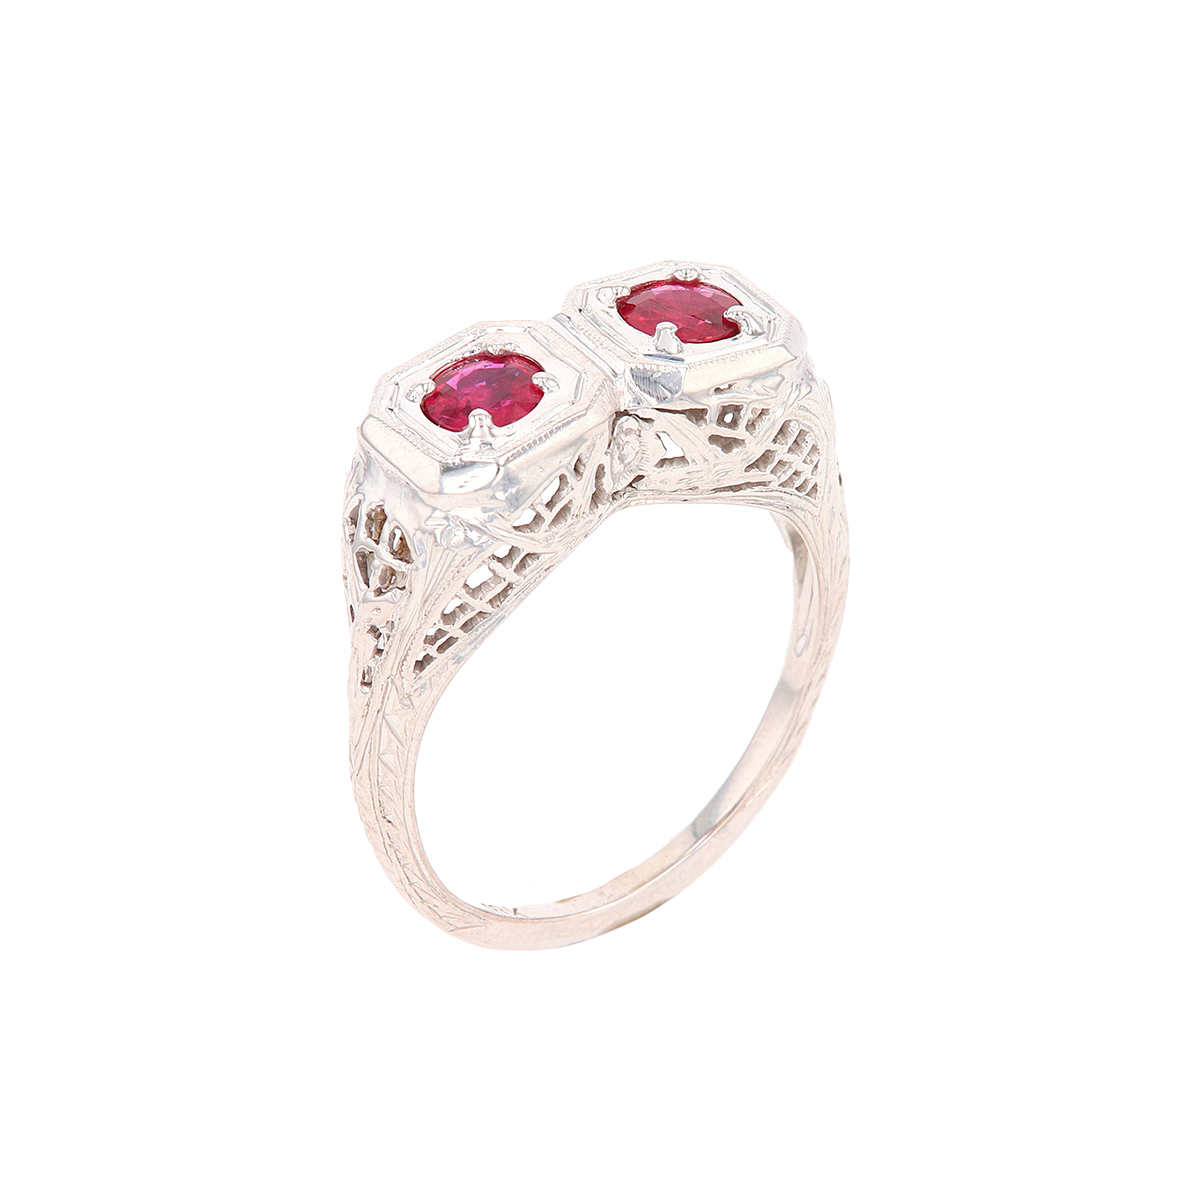 Estate 18K White Gold Double Ruby Ring